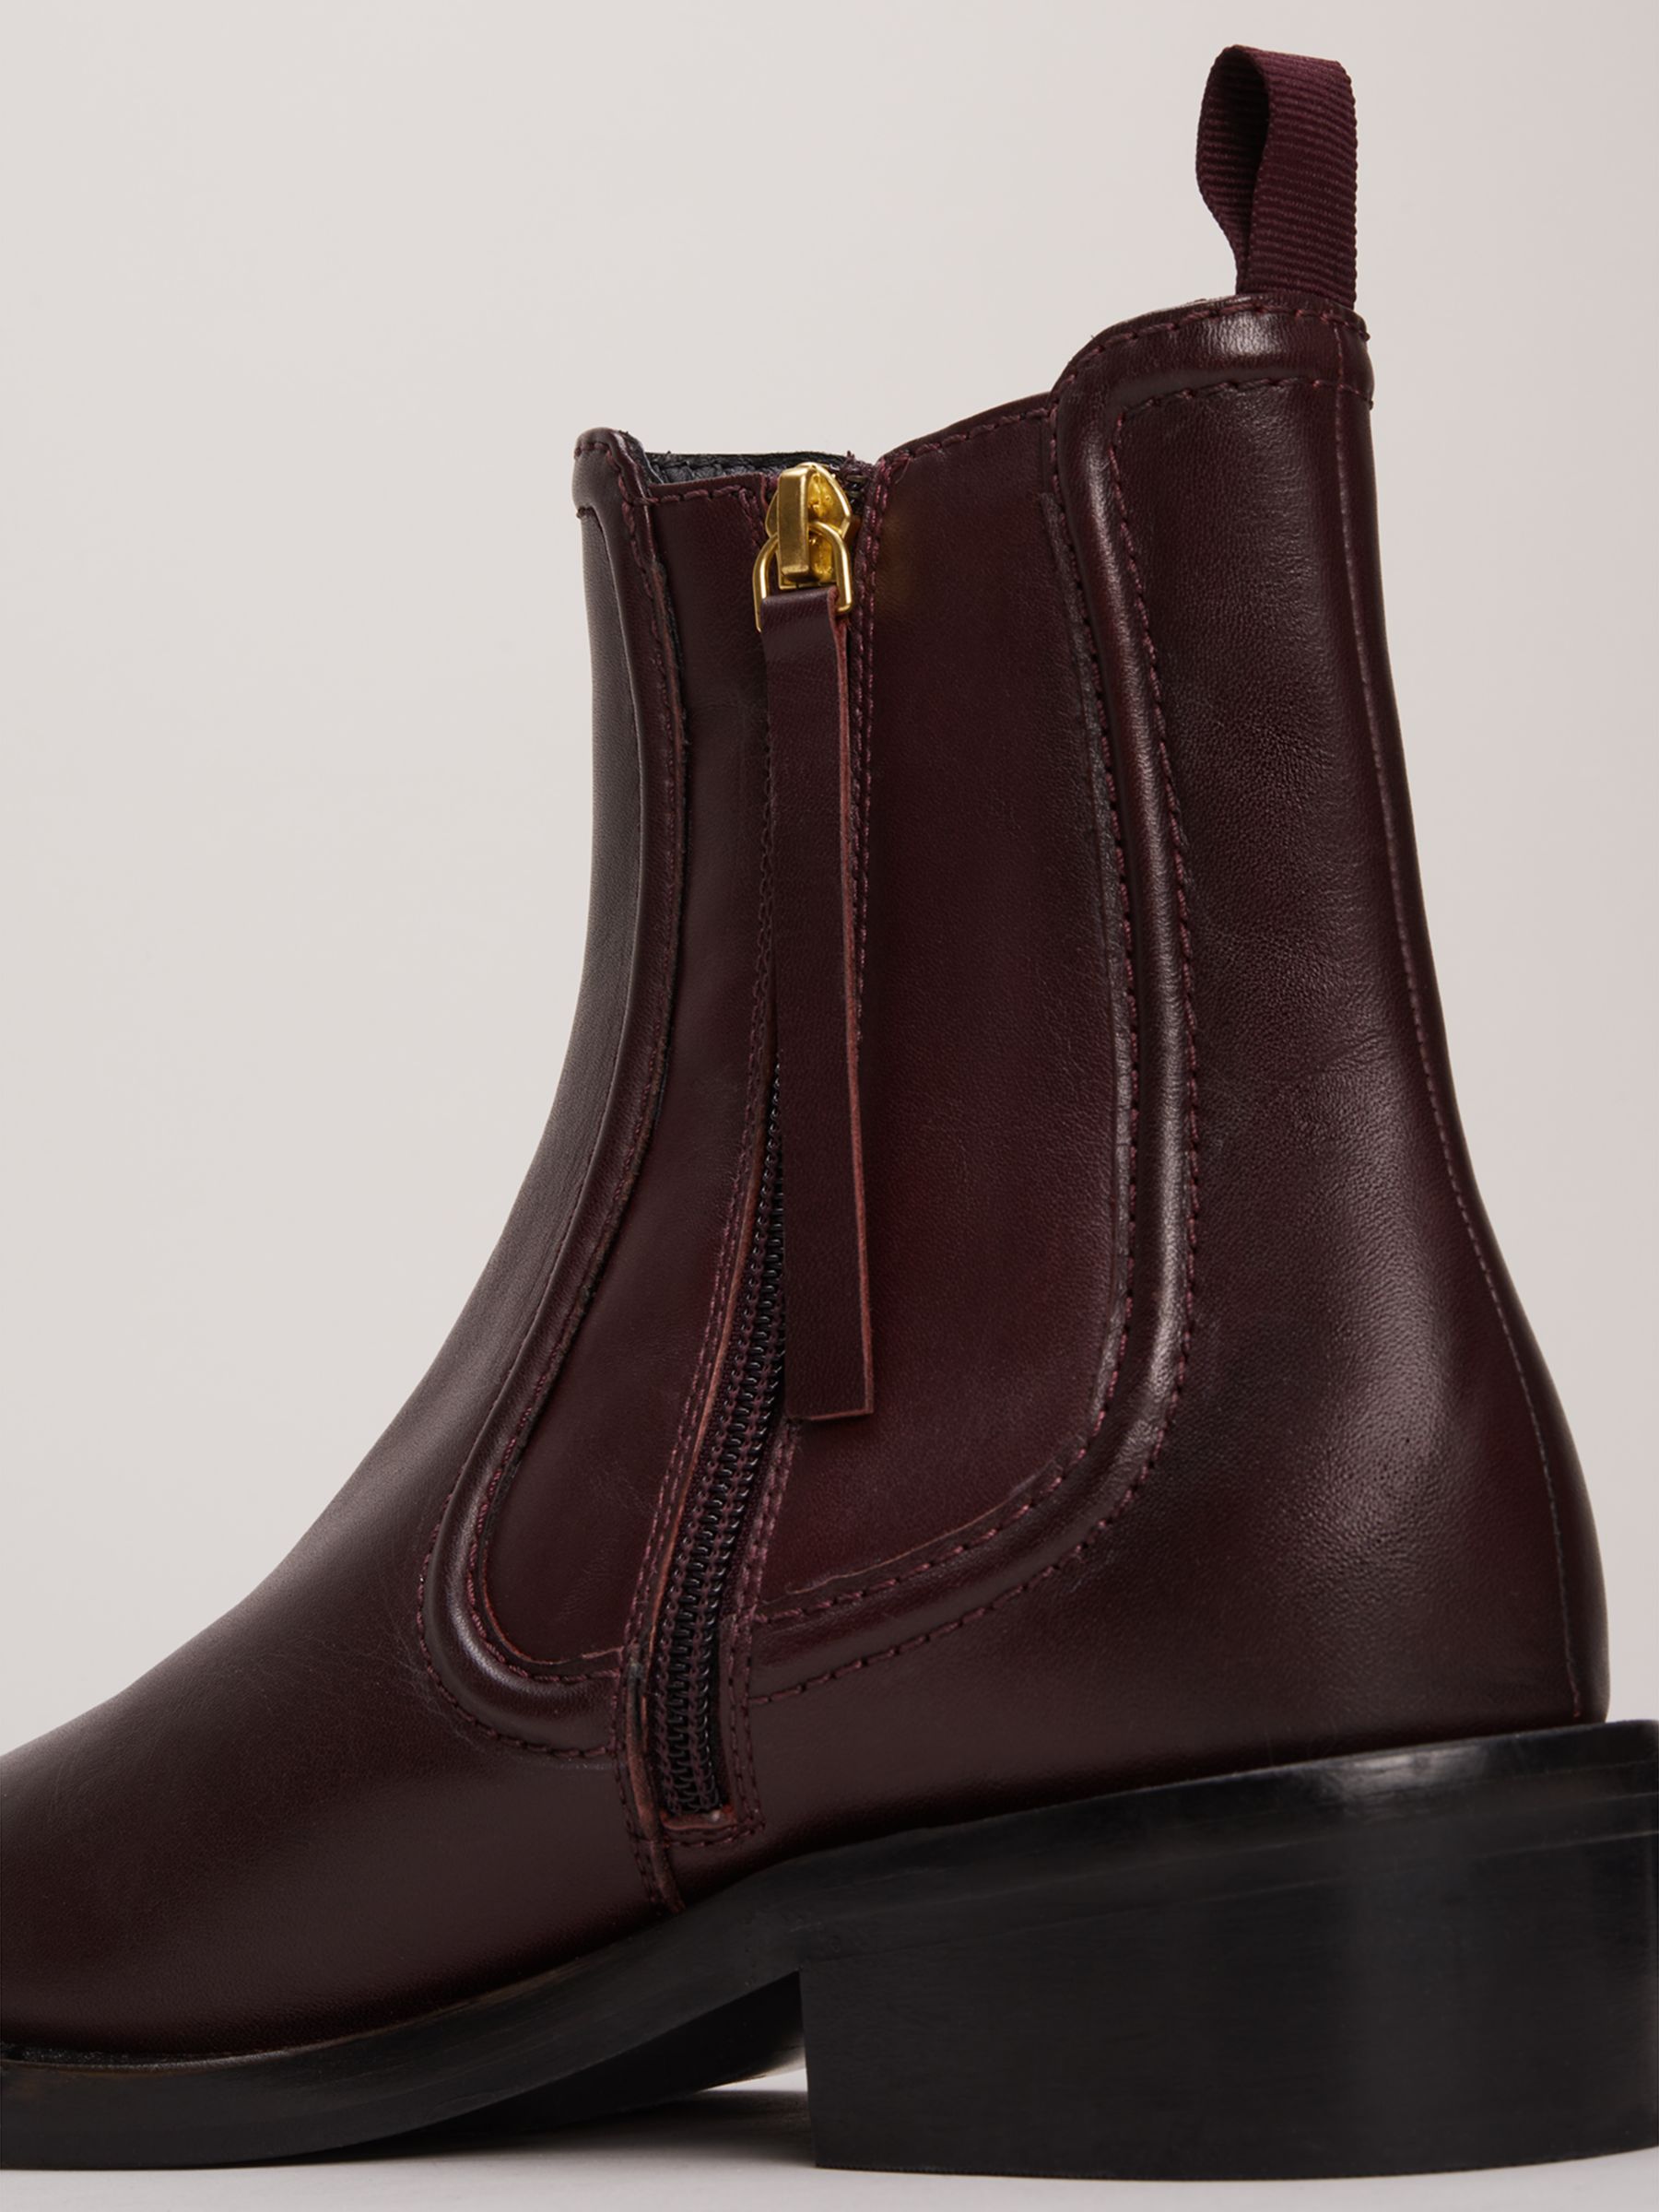 Buy Phase Eight Leather Chelsea Boots, Burgundy Online at johnlewis.com